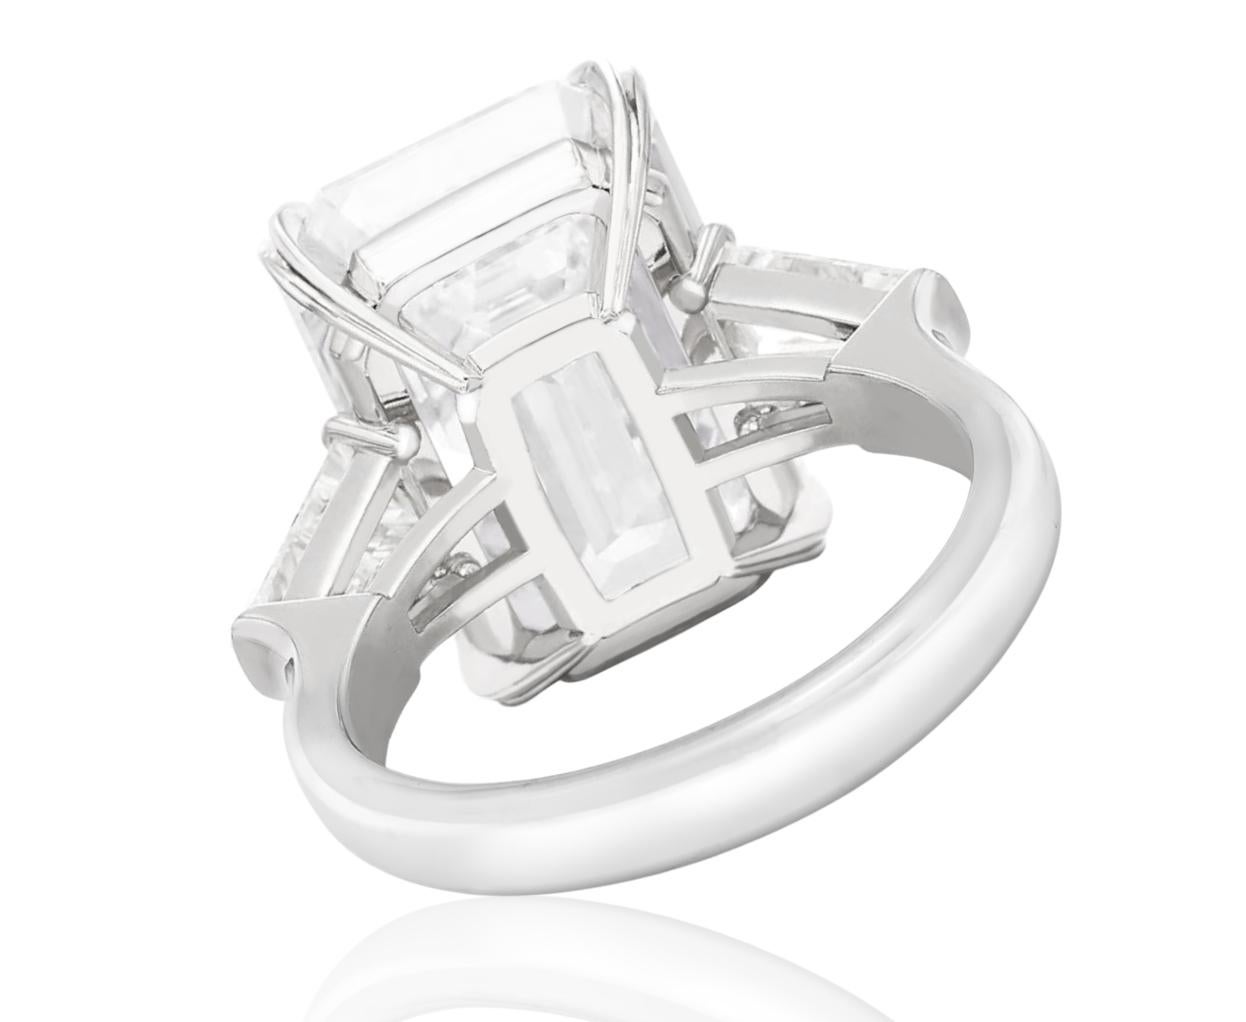 Antinori Fine Jewels is proud to offer this important and impressive 6 carat GIA certified  Emerald cut diamond ring. 

The ring consists of one emerald cut diamond weighing 6 carat accompanied by a GIA report The 6 center emerald cut is accented by